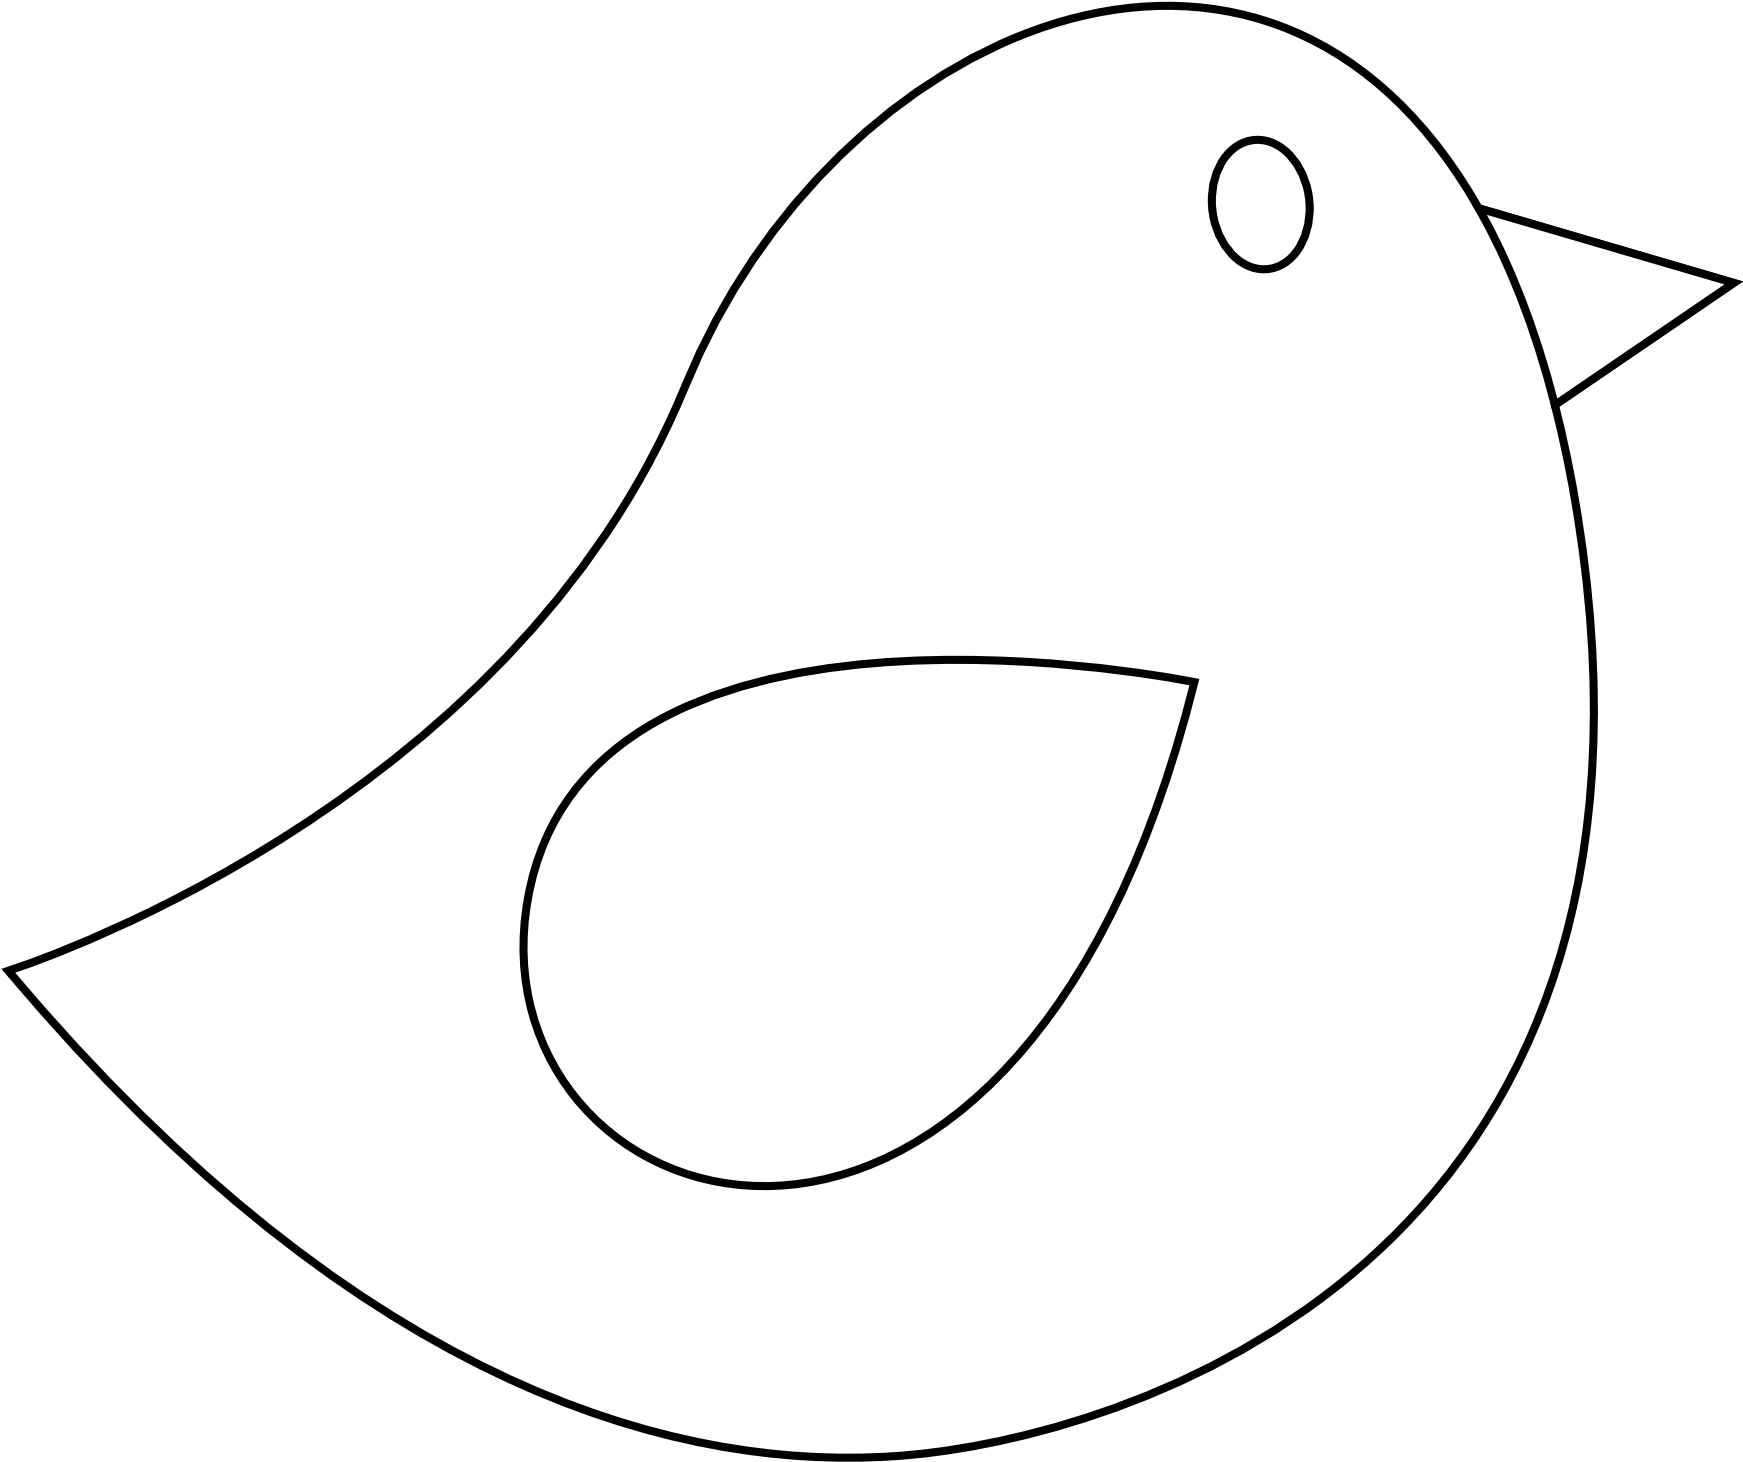 A White Bird With A Black Background